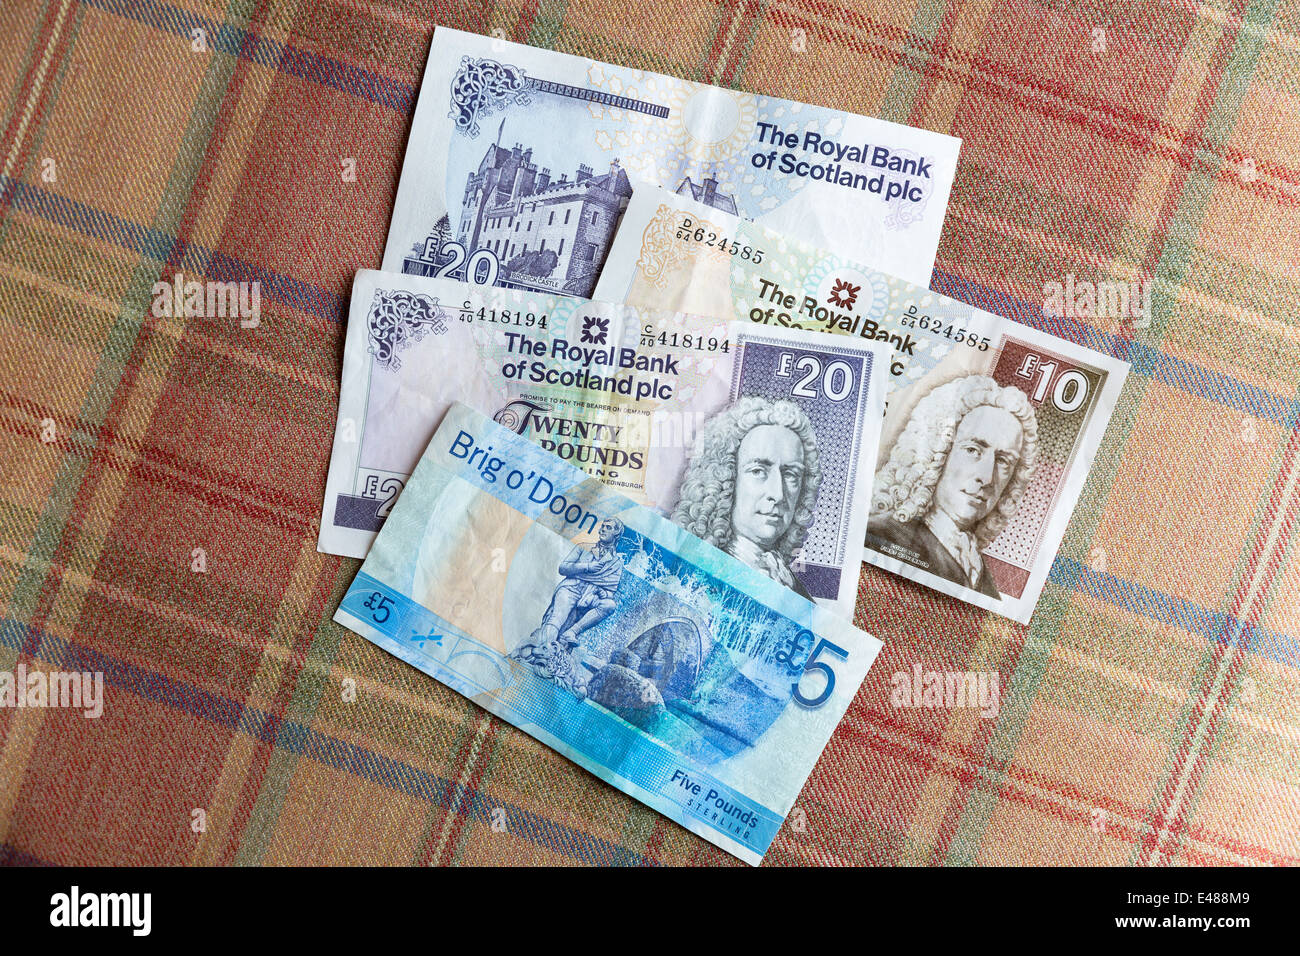 Scottish banknotes from The Royal Bank of SCOTLAND £5, £10 £20 on traditional Scottish tartan background Stock Photo